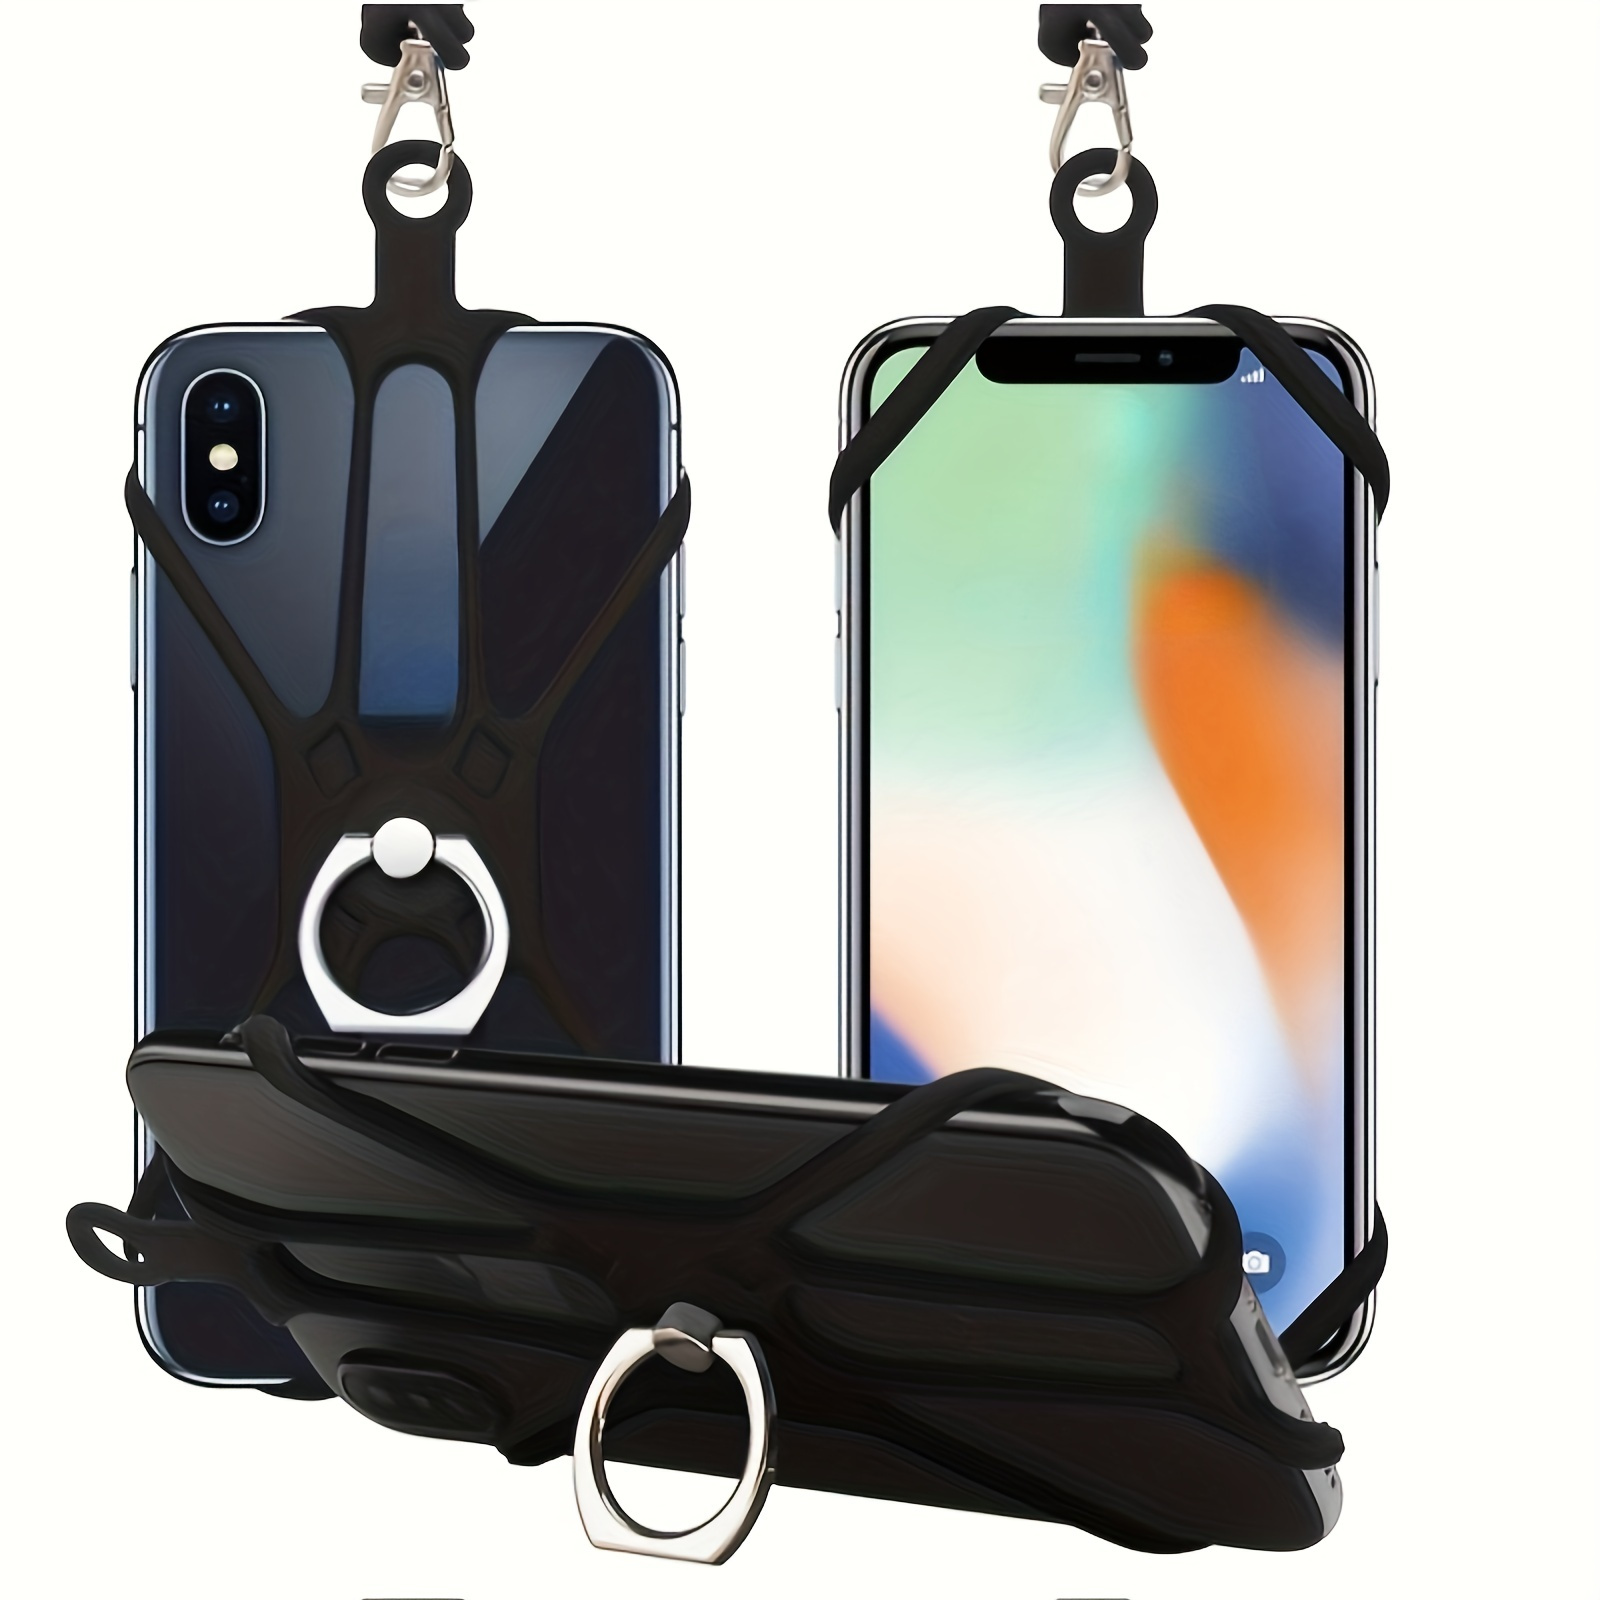 

1pc Upgrade Your Phone Safety With This Silicone Mobile Phone Holder! Halloween, Thanksgiving, Christmas Presents.